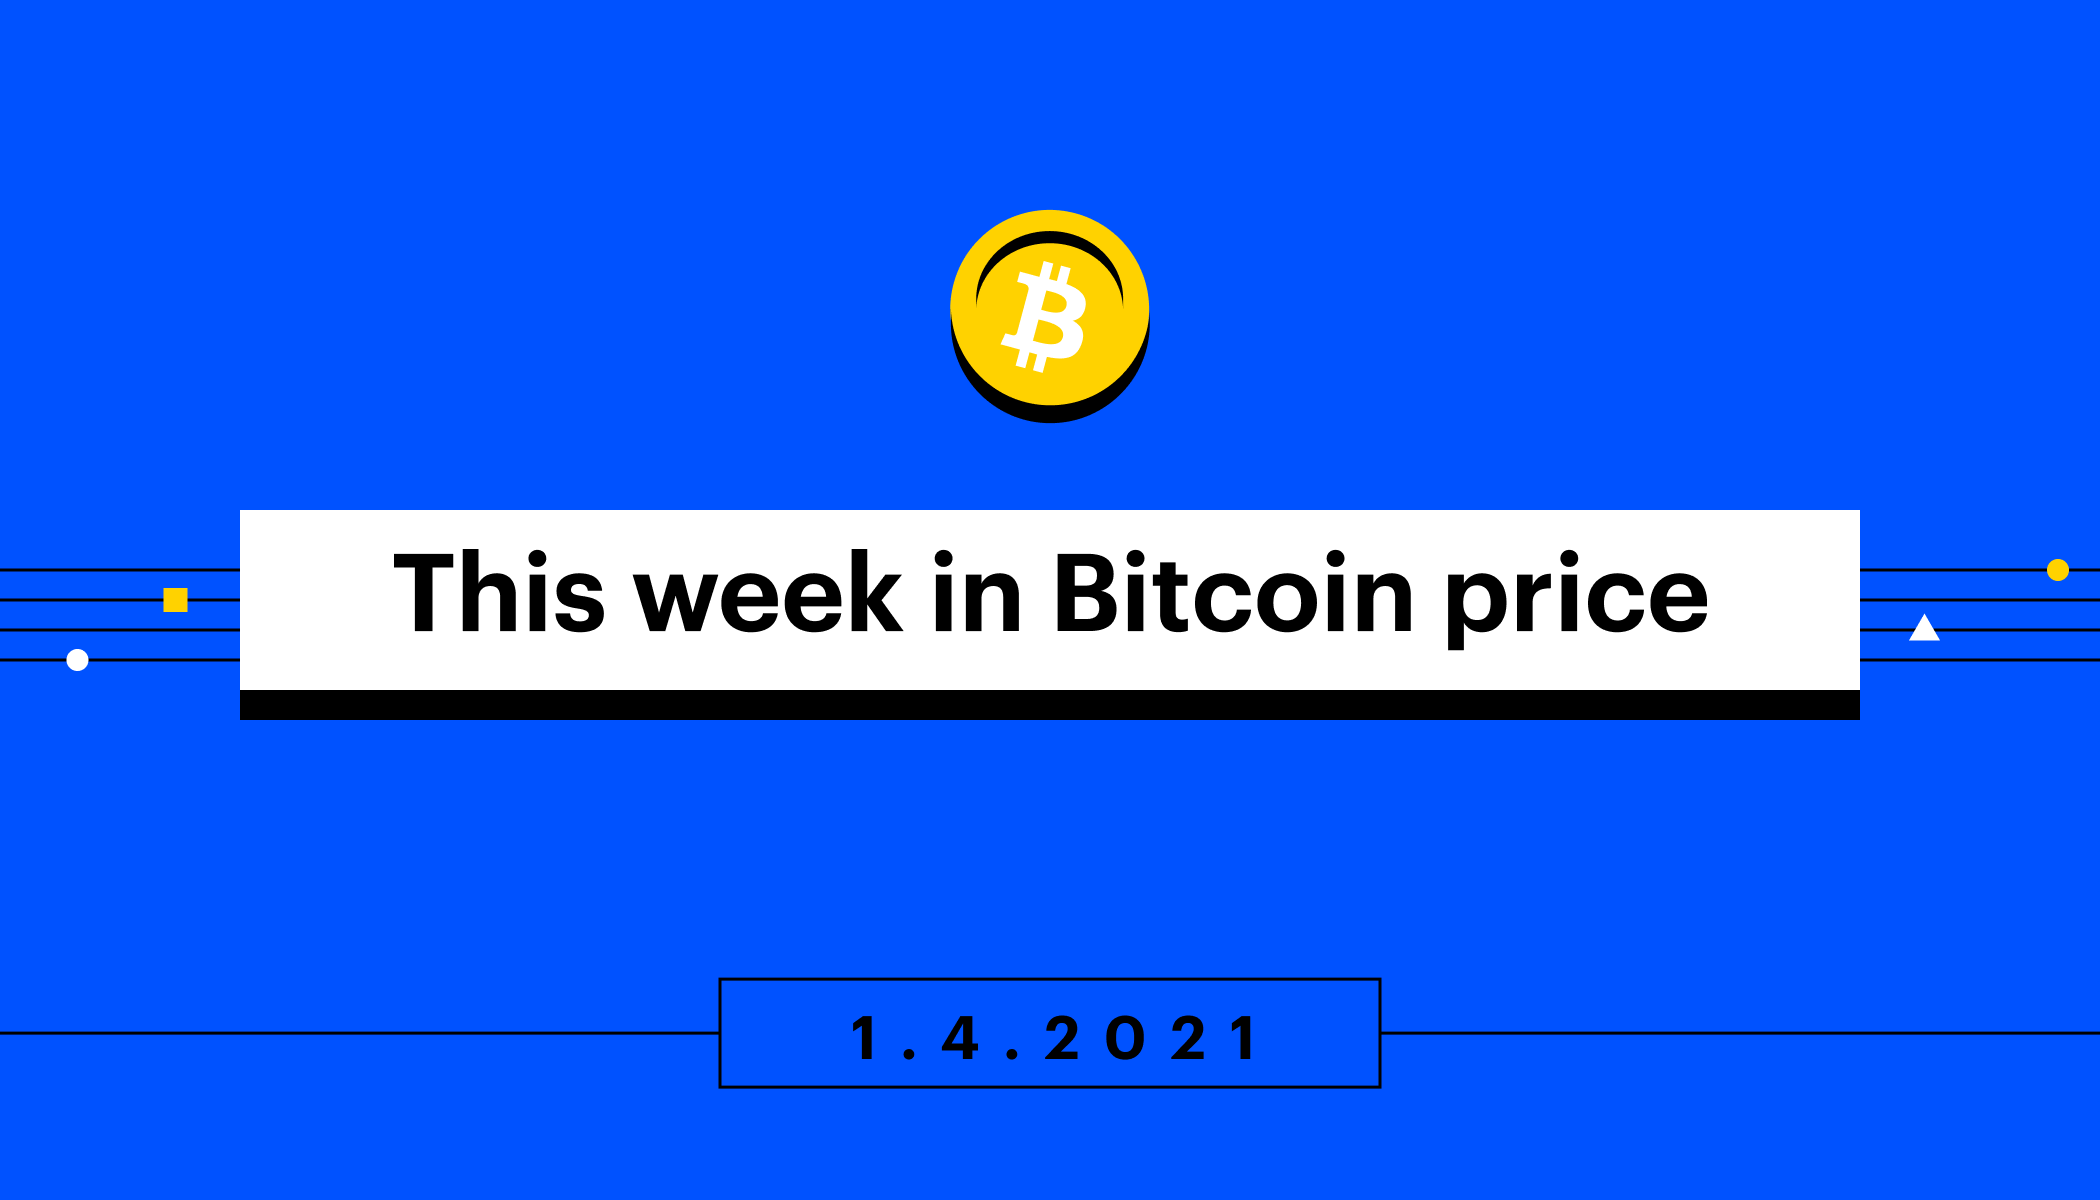 This week in Bitcoin price: Dec 29 - Jan 4 | Coinbase